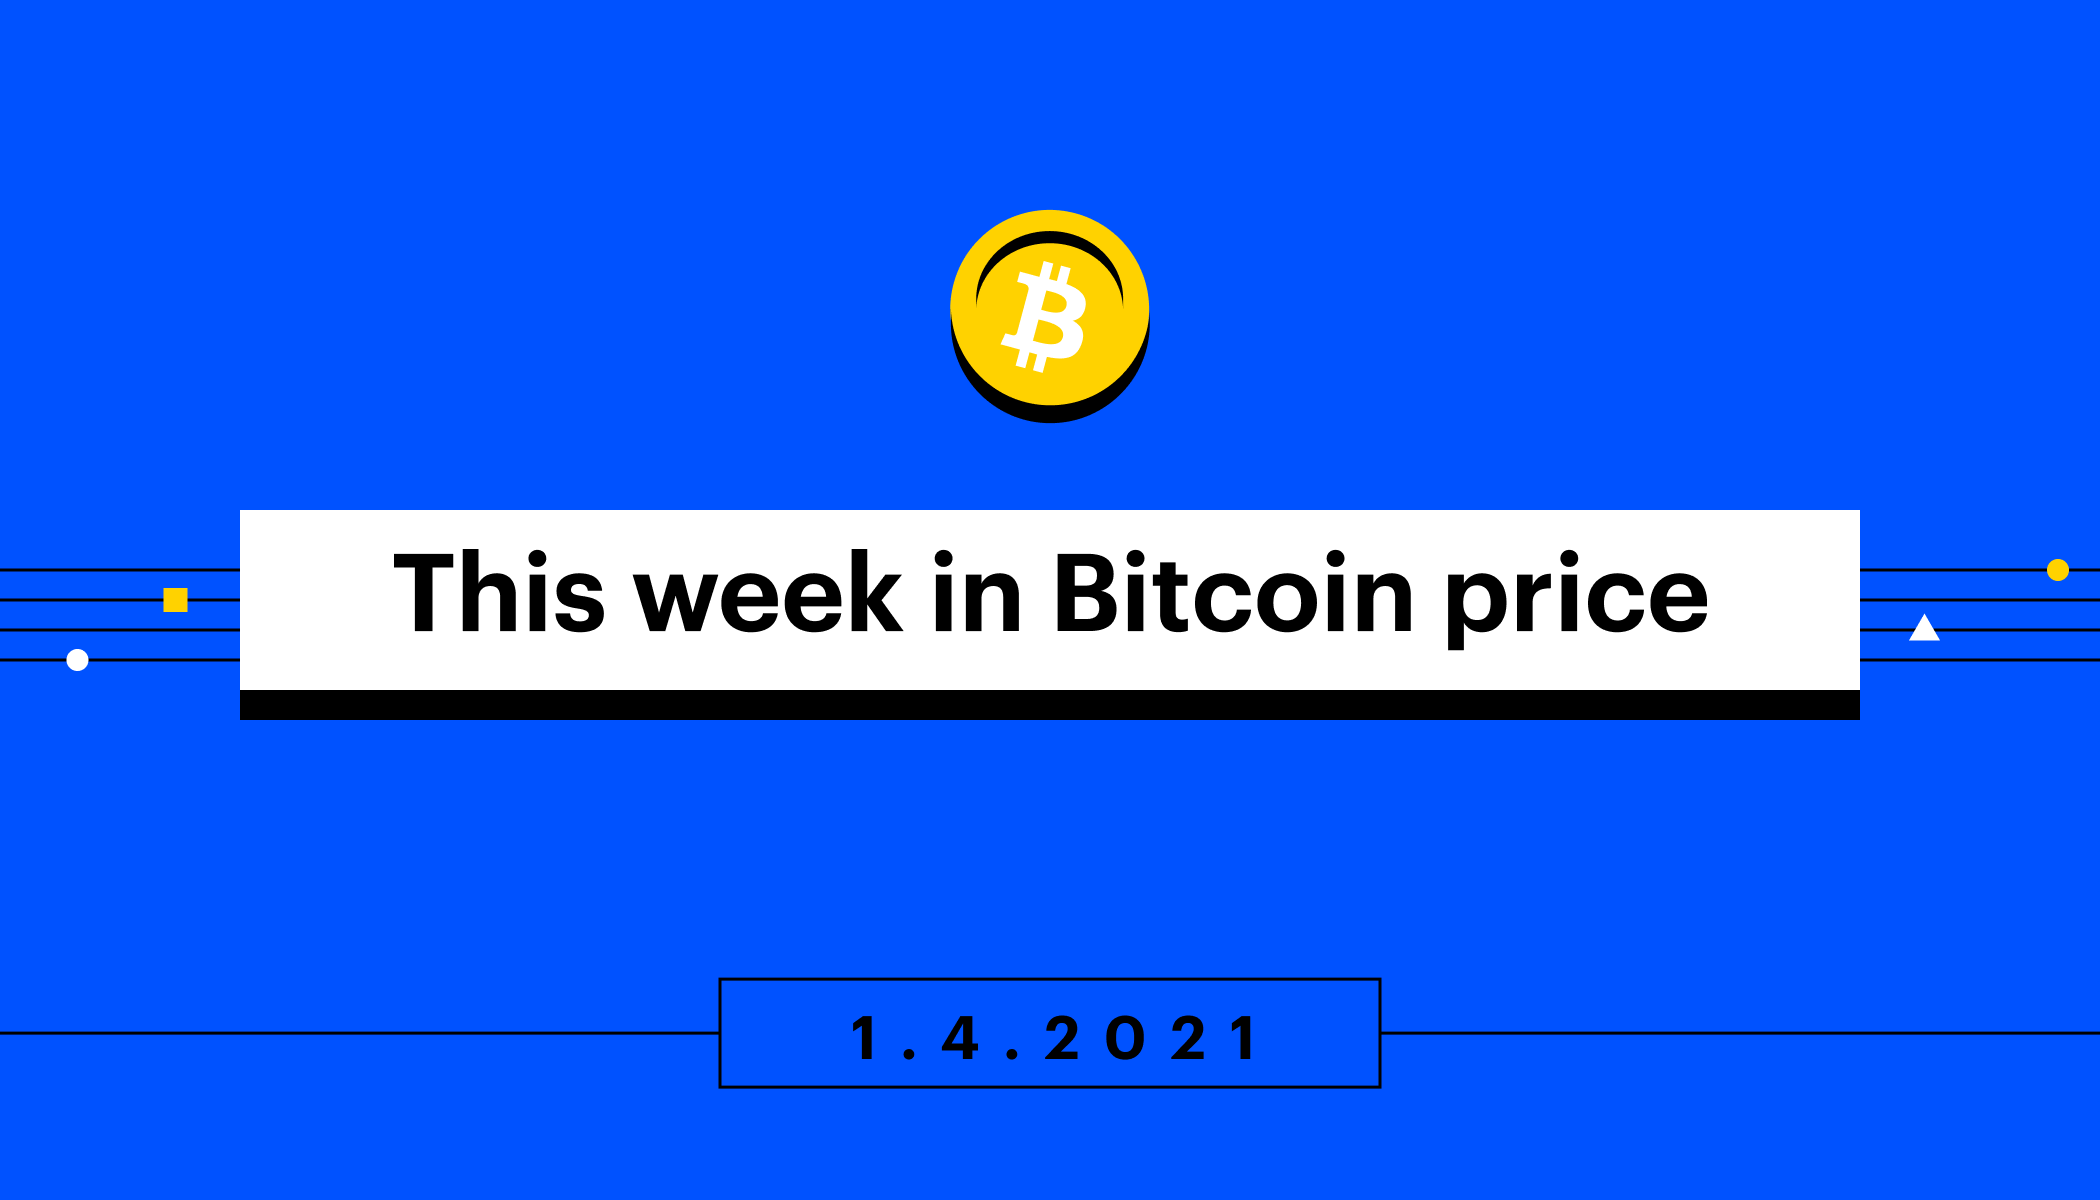 This week in Bitcoin price: Dec 29 - Jan 4 | Coinbase